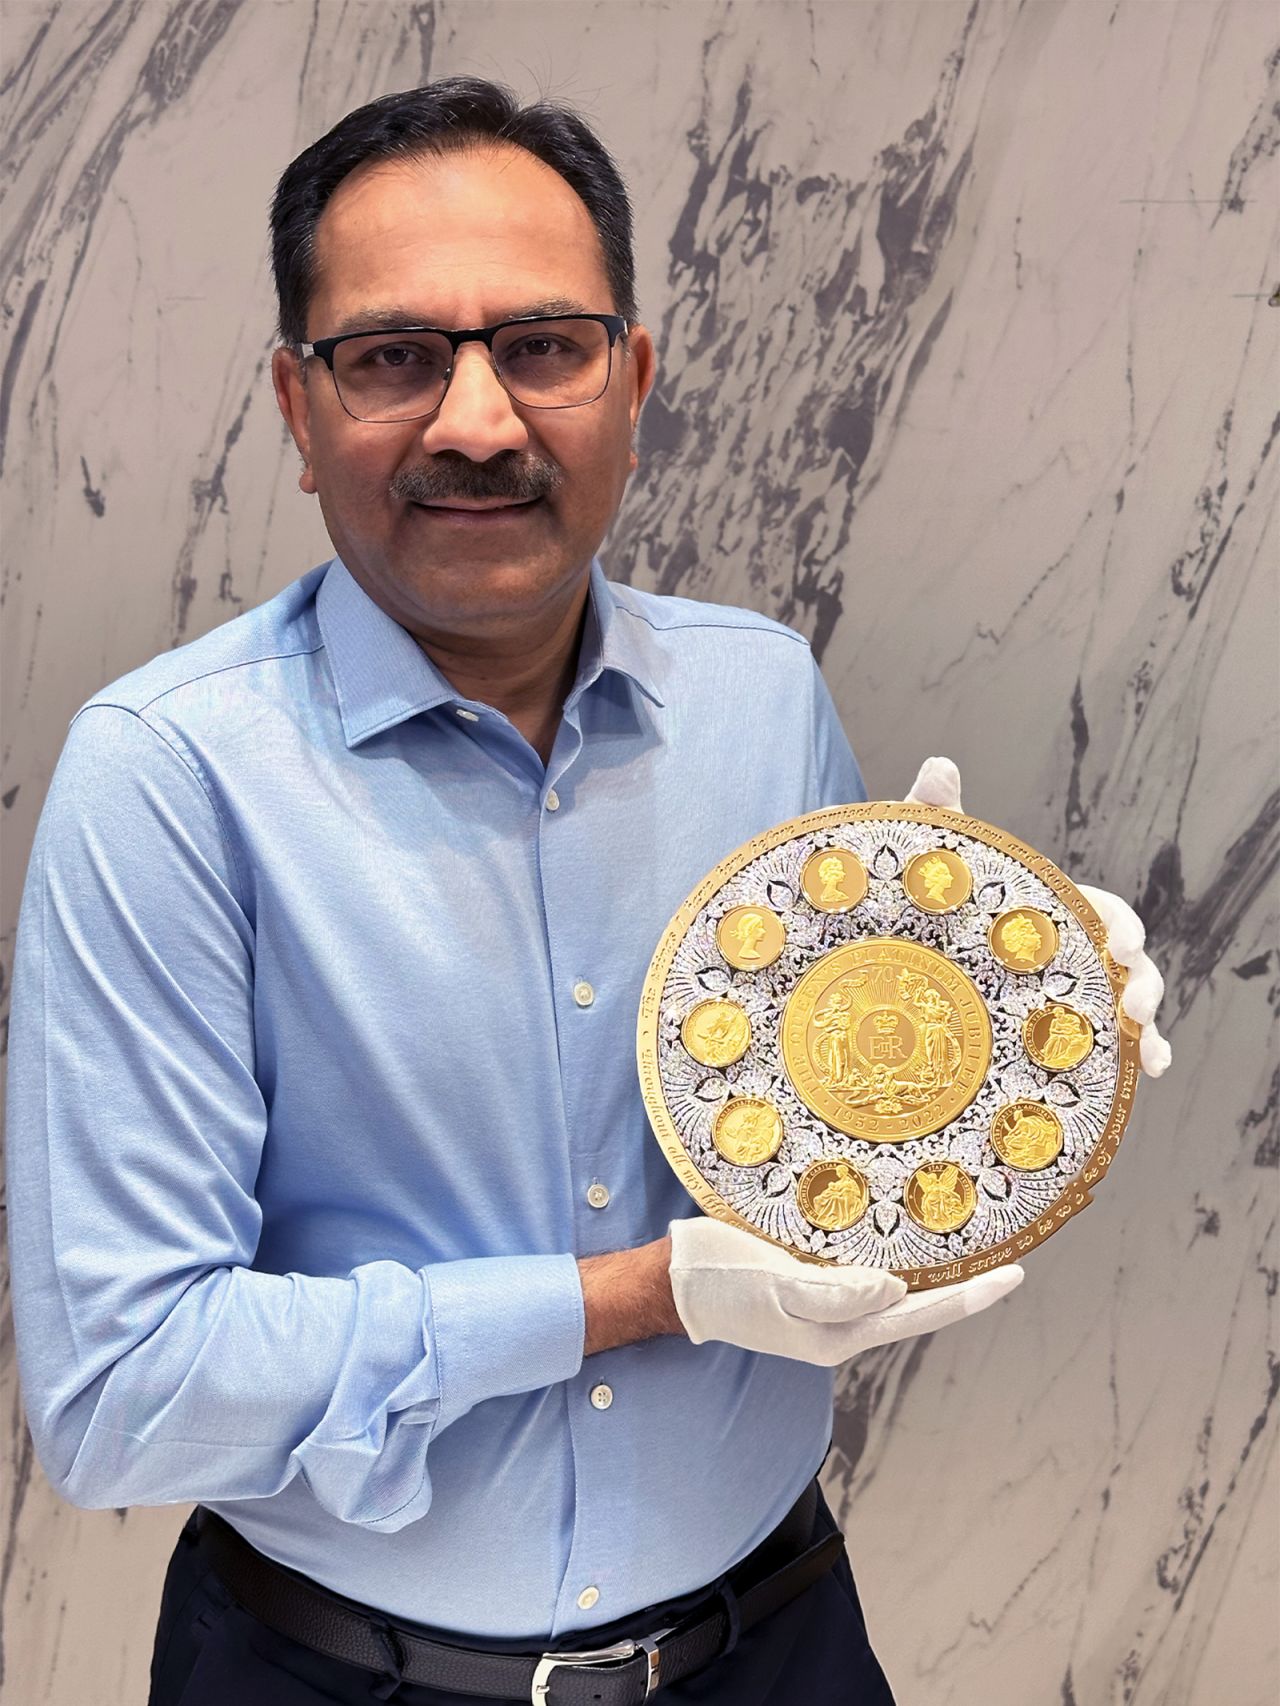 Businessman Sanjiv Mehta, who acquired the rights to the East India Company in 2005, poses with the diamond-encrusted coin.